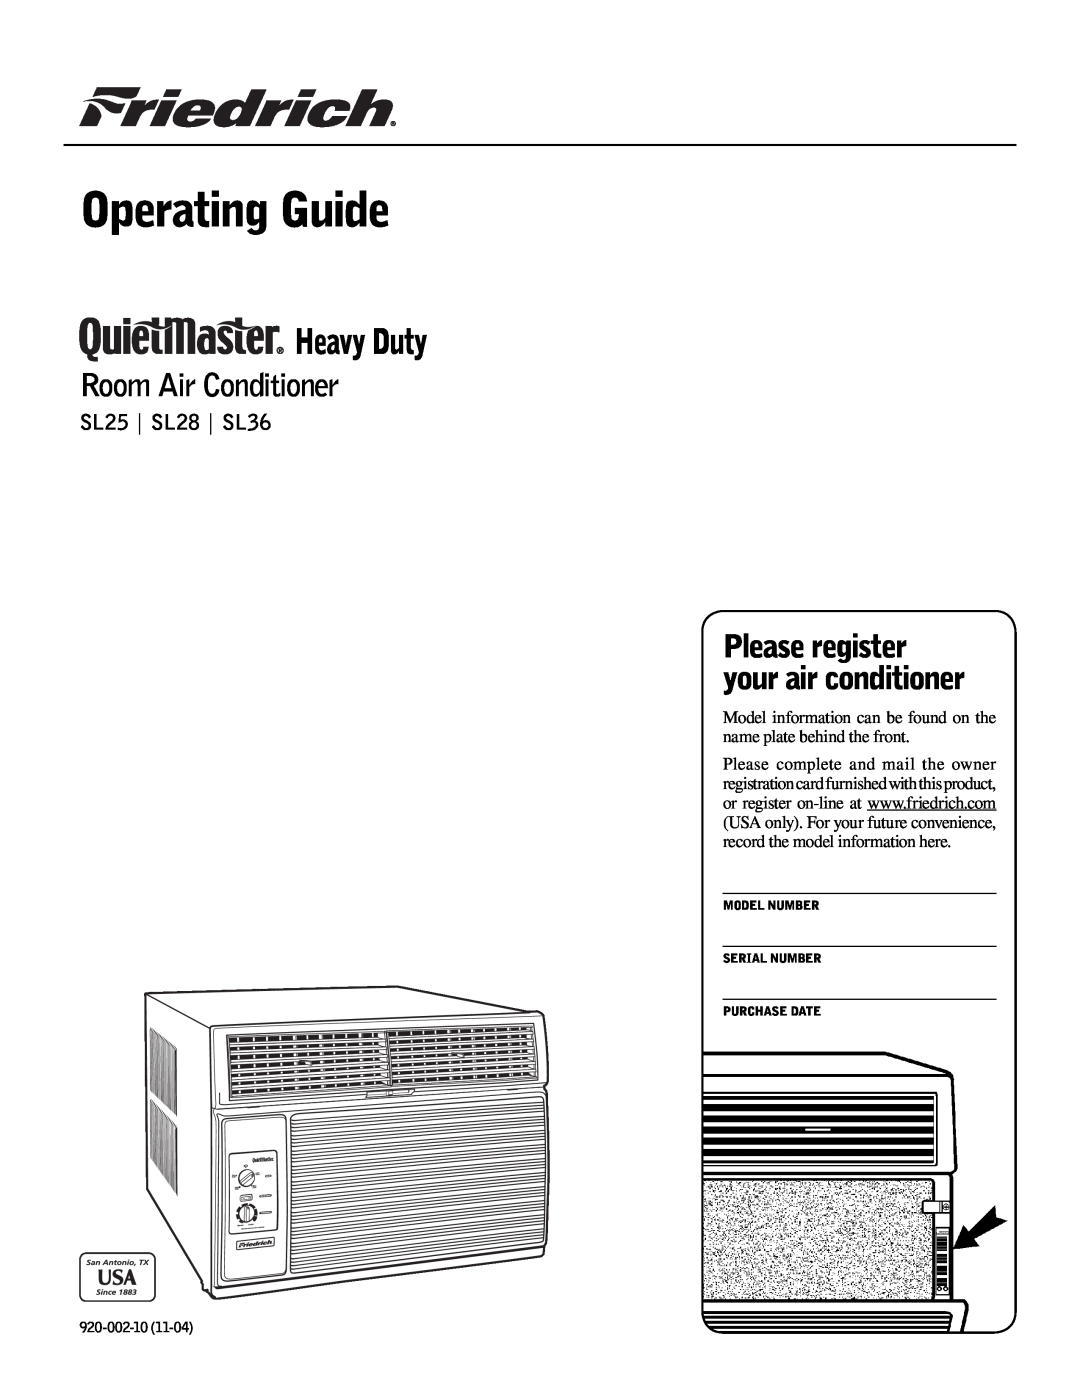 Friedrich SL25 manual Operating Guide, Heavy Duty, Room Air Conditioner, Please register your air conditioner, 920-002-10 